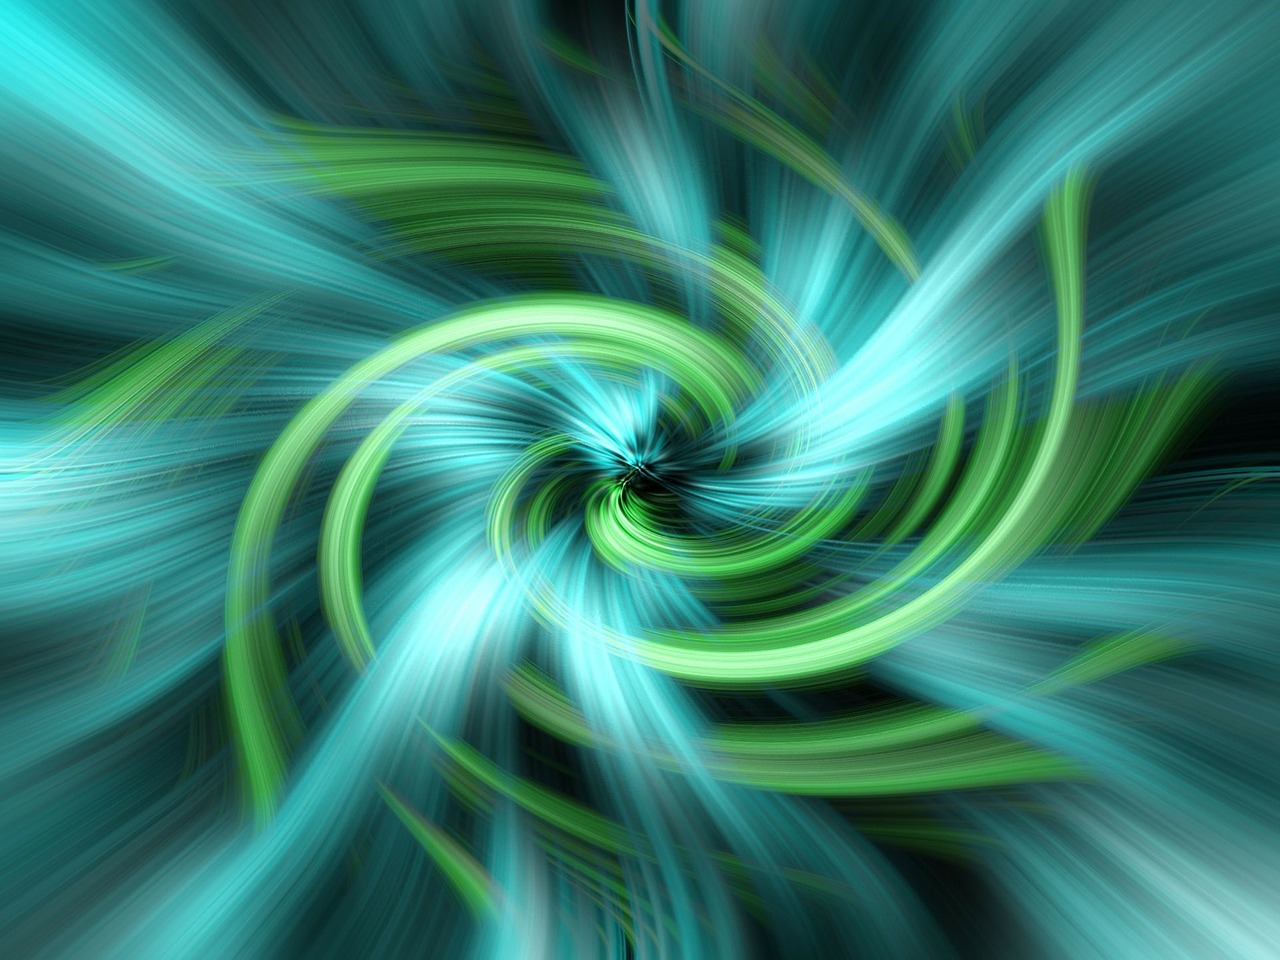 A swirling ball of green energy.